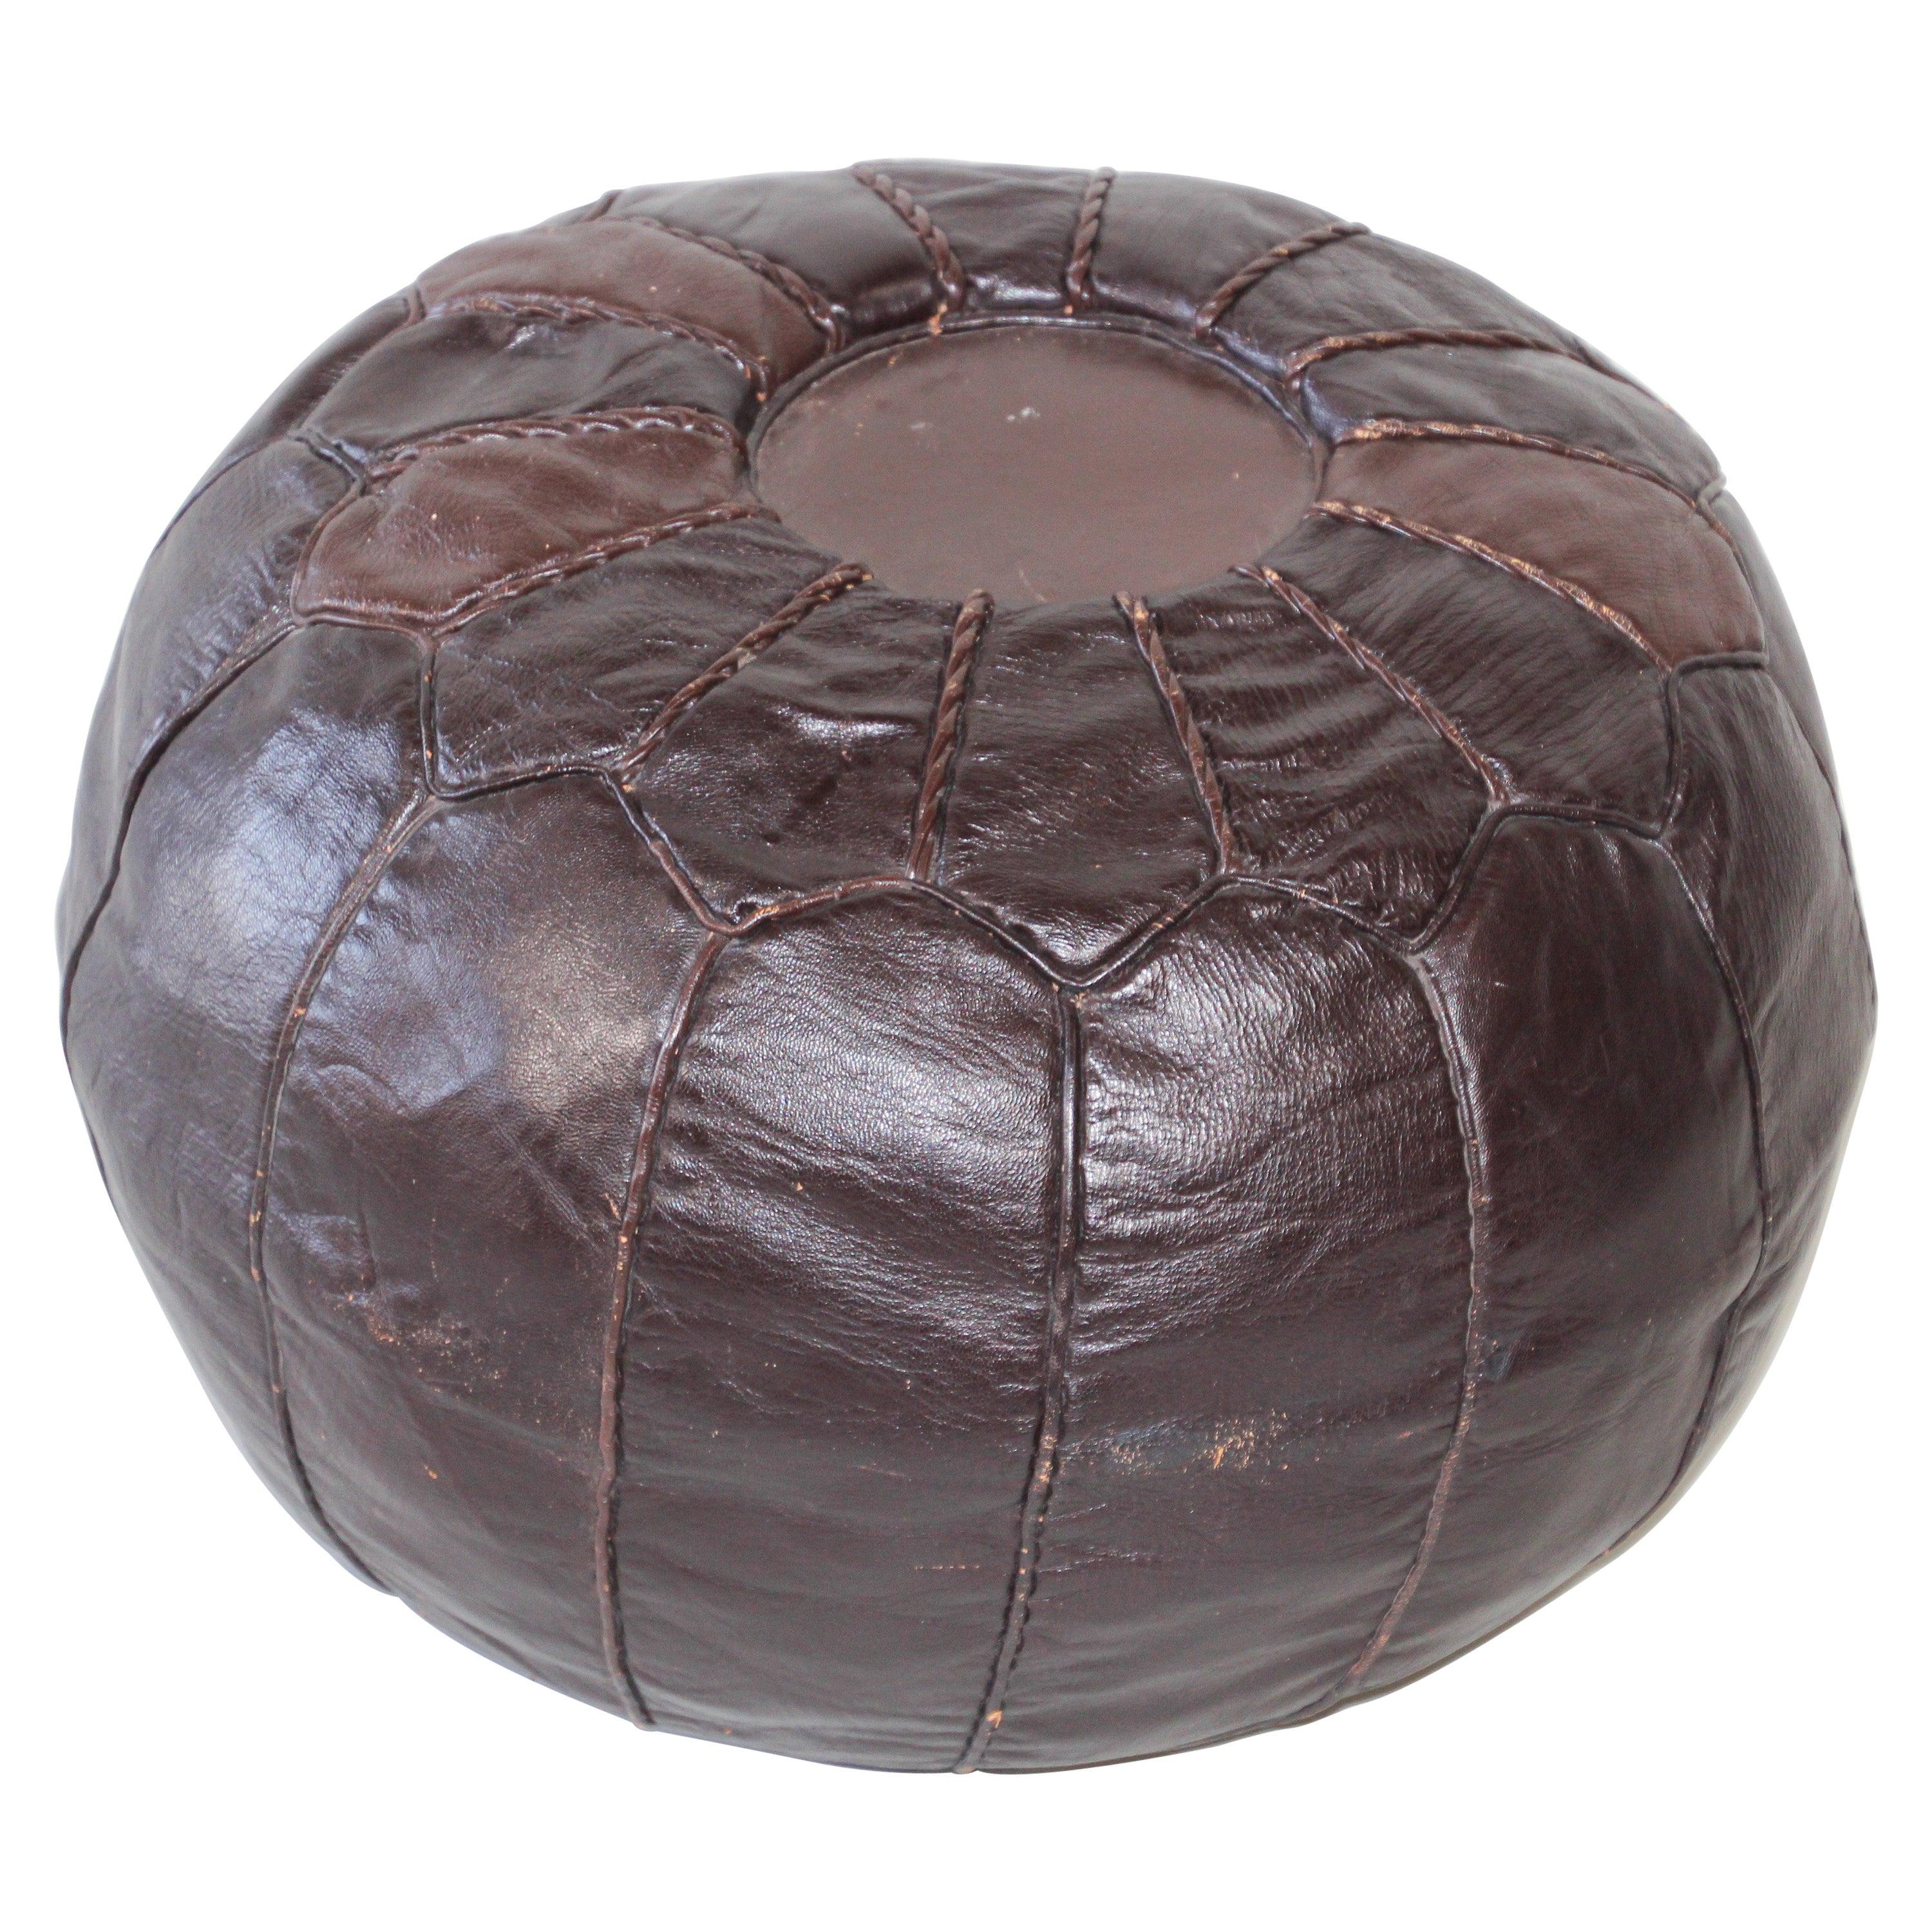 Vintage Moroccan Round Pouf Hand-Tooled in Fez Morocco